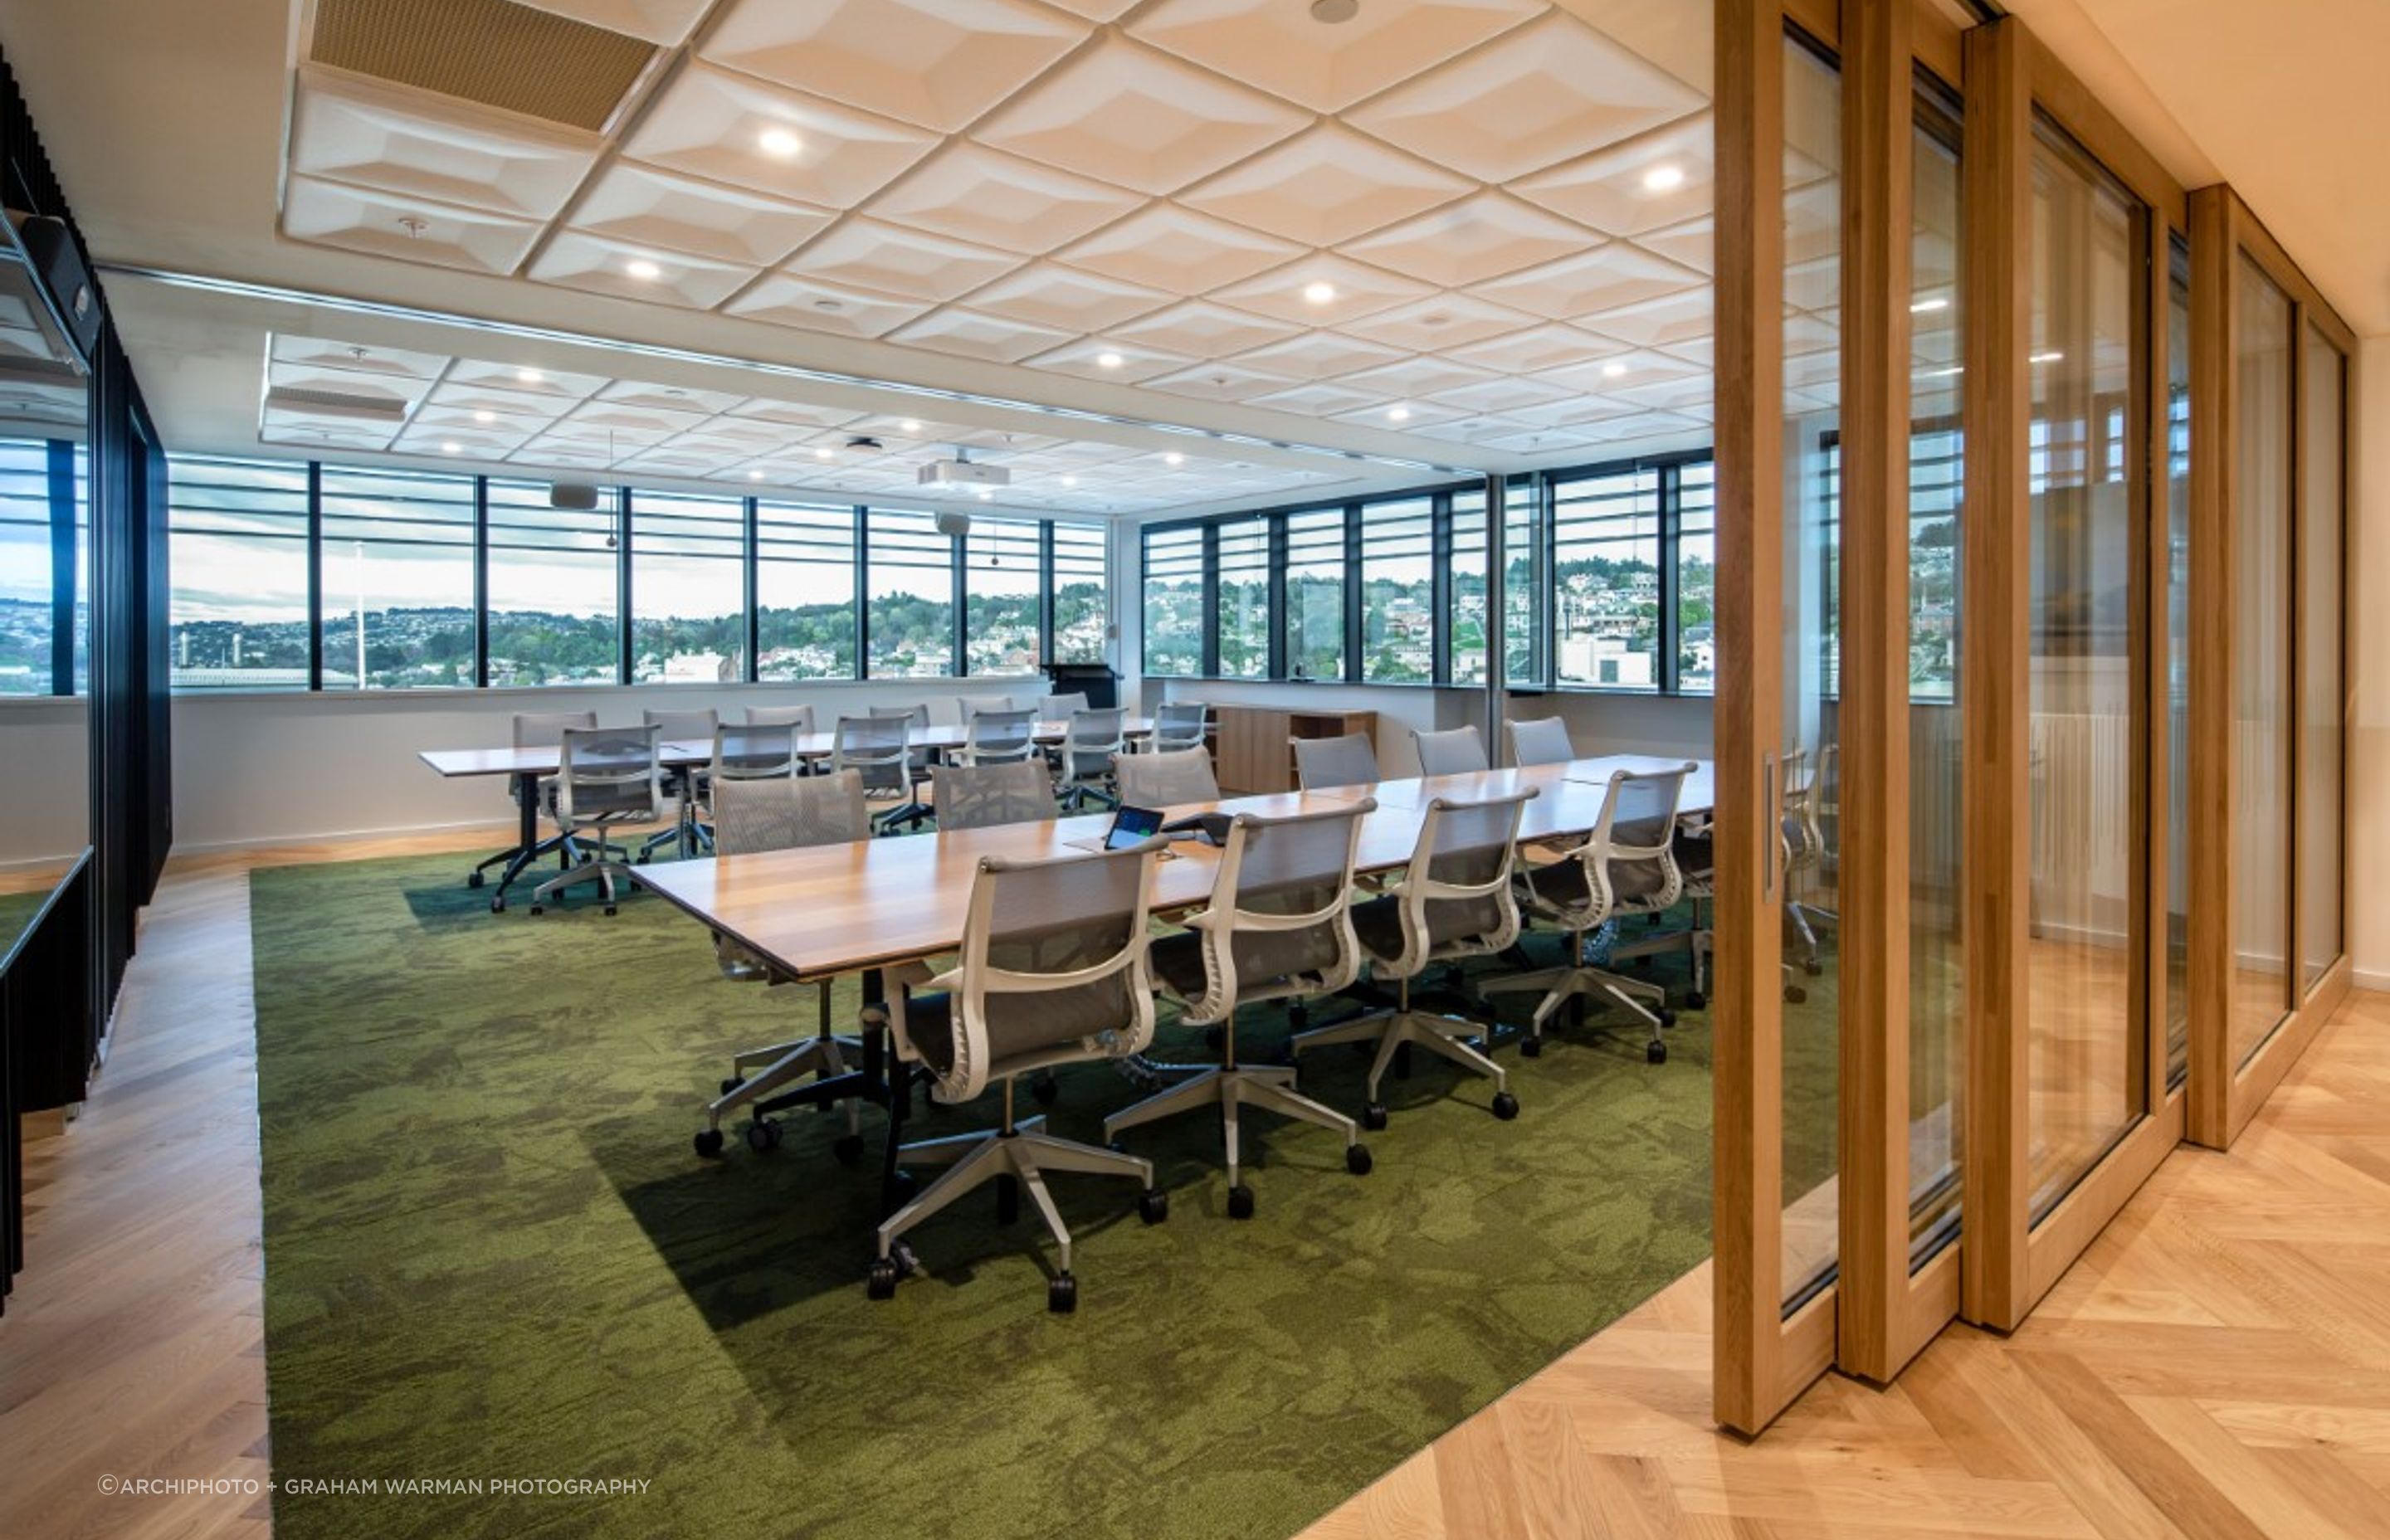 Conference Rooms - opened operable wall